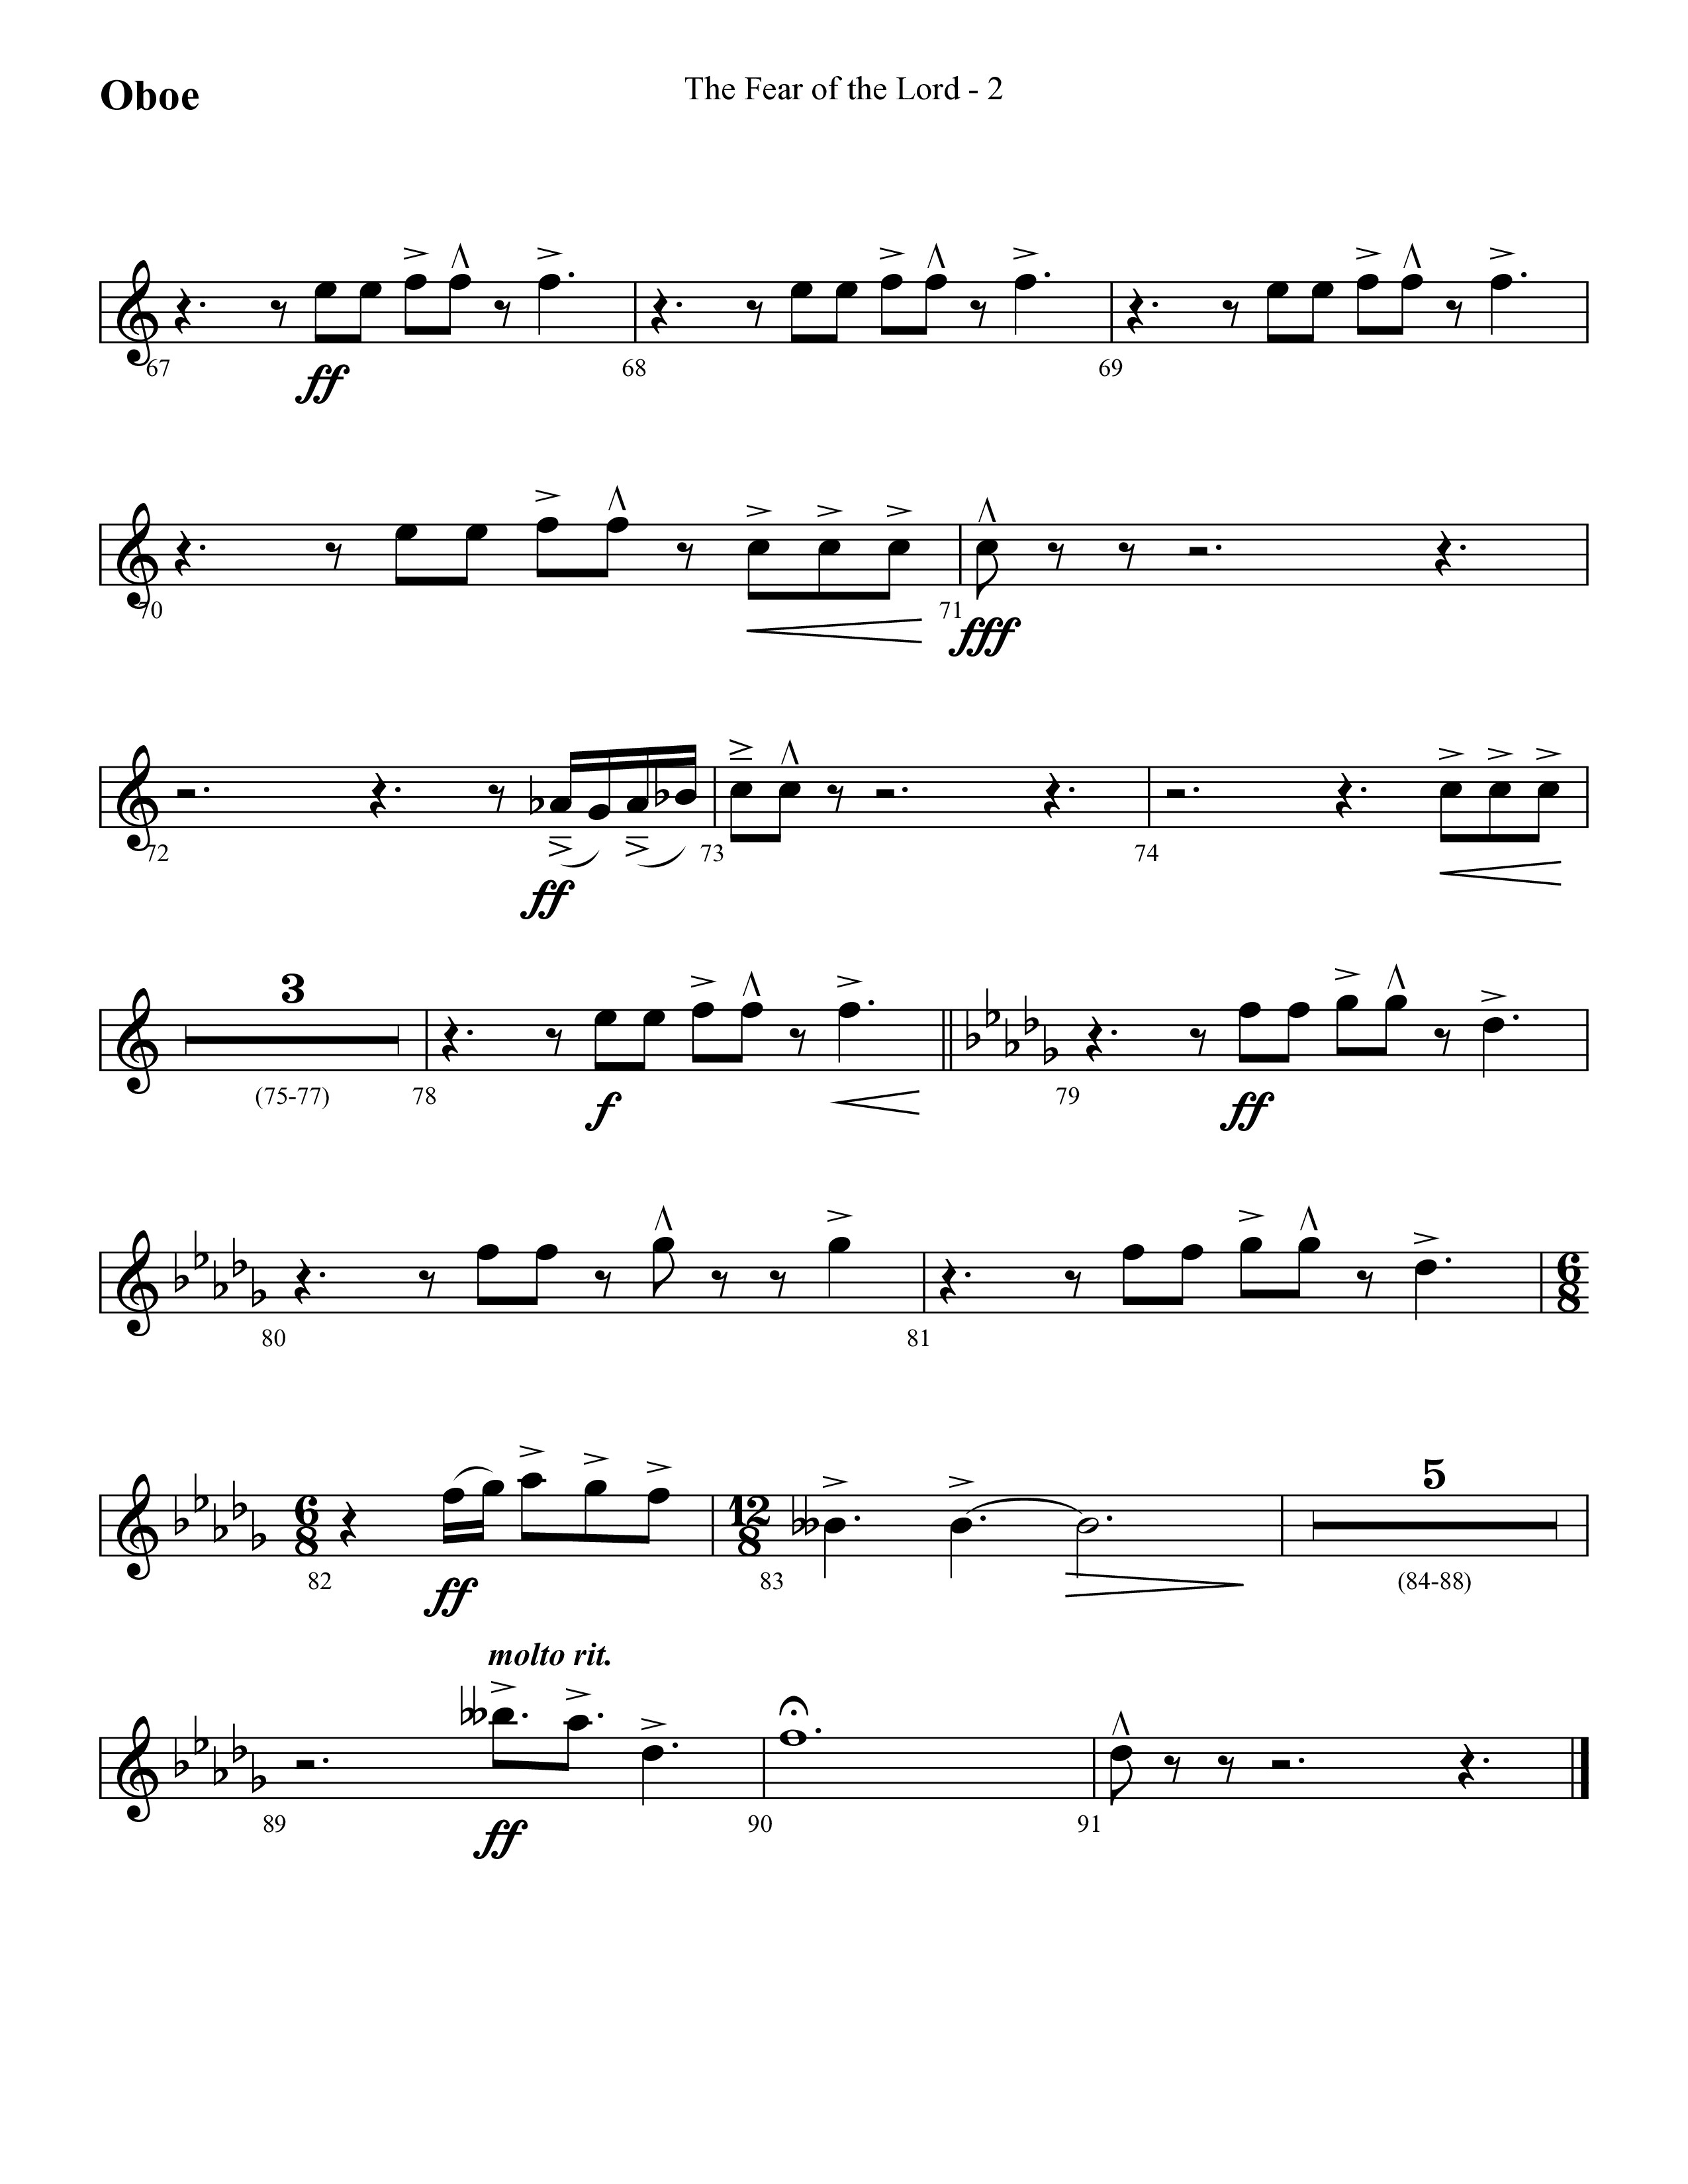 The Fear Of The Lord (Choral Anthem SATB) Oboe (Lifeway Choral / Arr. Cliff Duren)